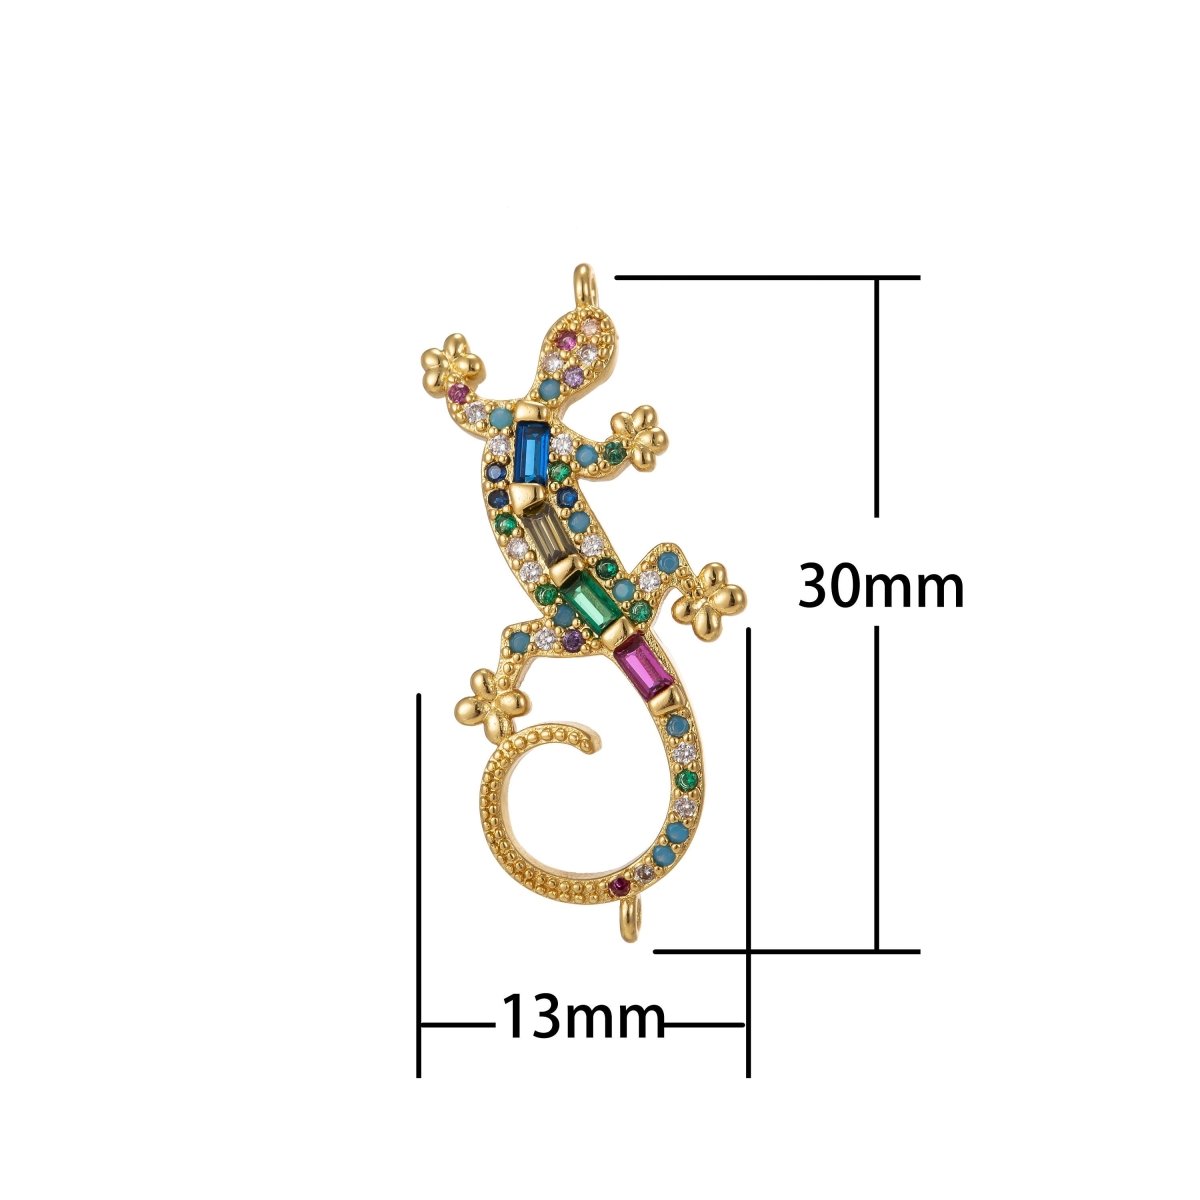 Dainty Colorful Micro Pave Gecko Charm, Cubic Lizard Charm Gold Filled Reptile Charm Animal Charm for Necklace, Earring Component F-314 - DLUXCA